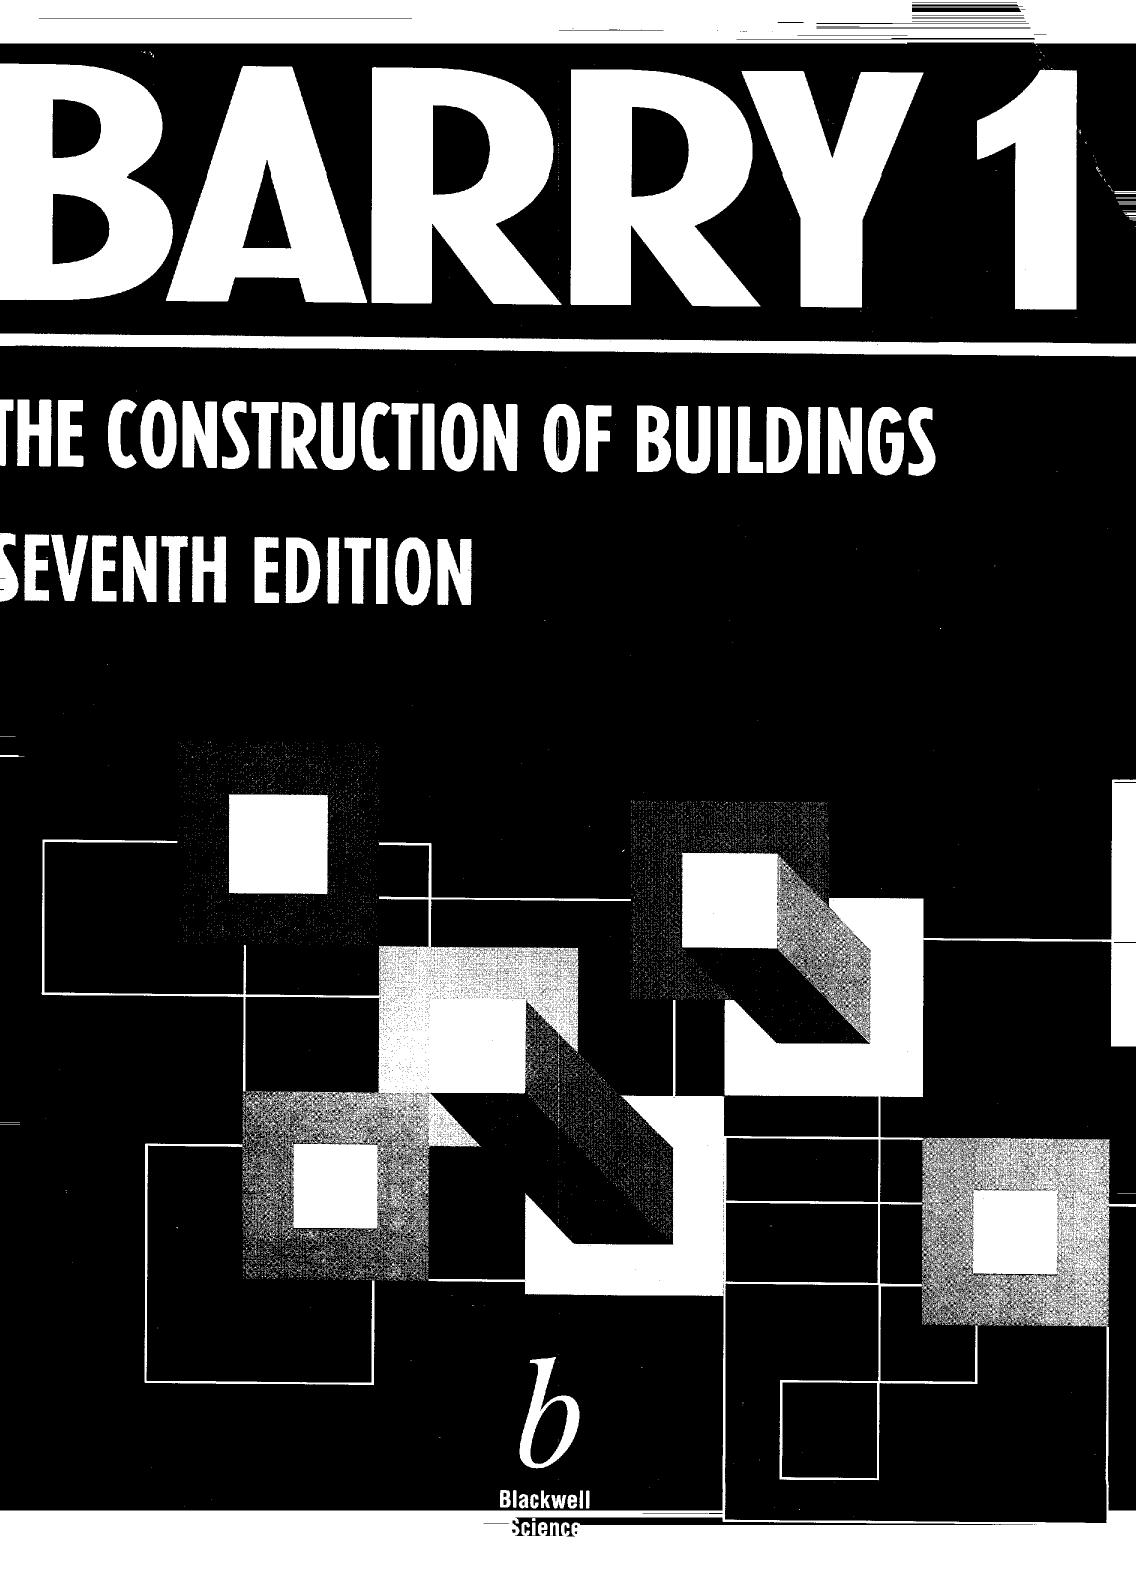 THE Construction of buildings 7TH ED 1999